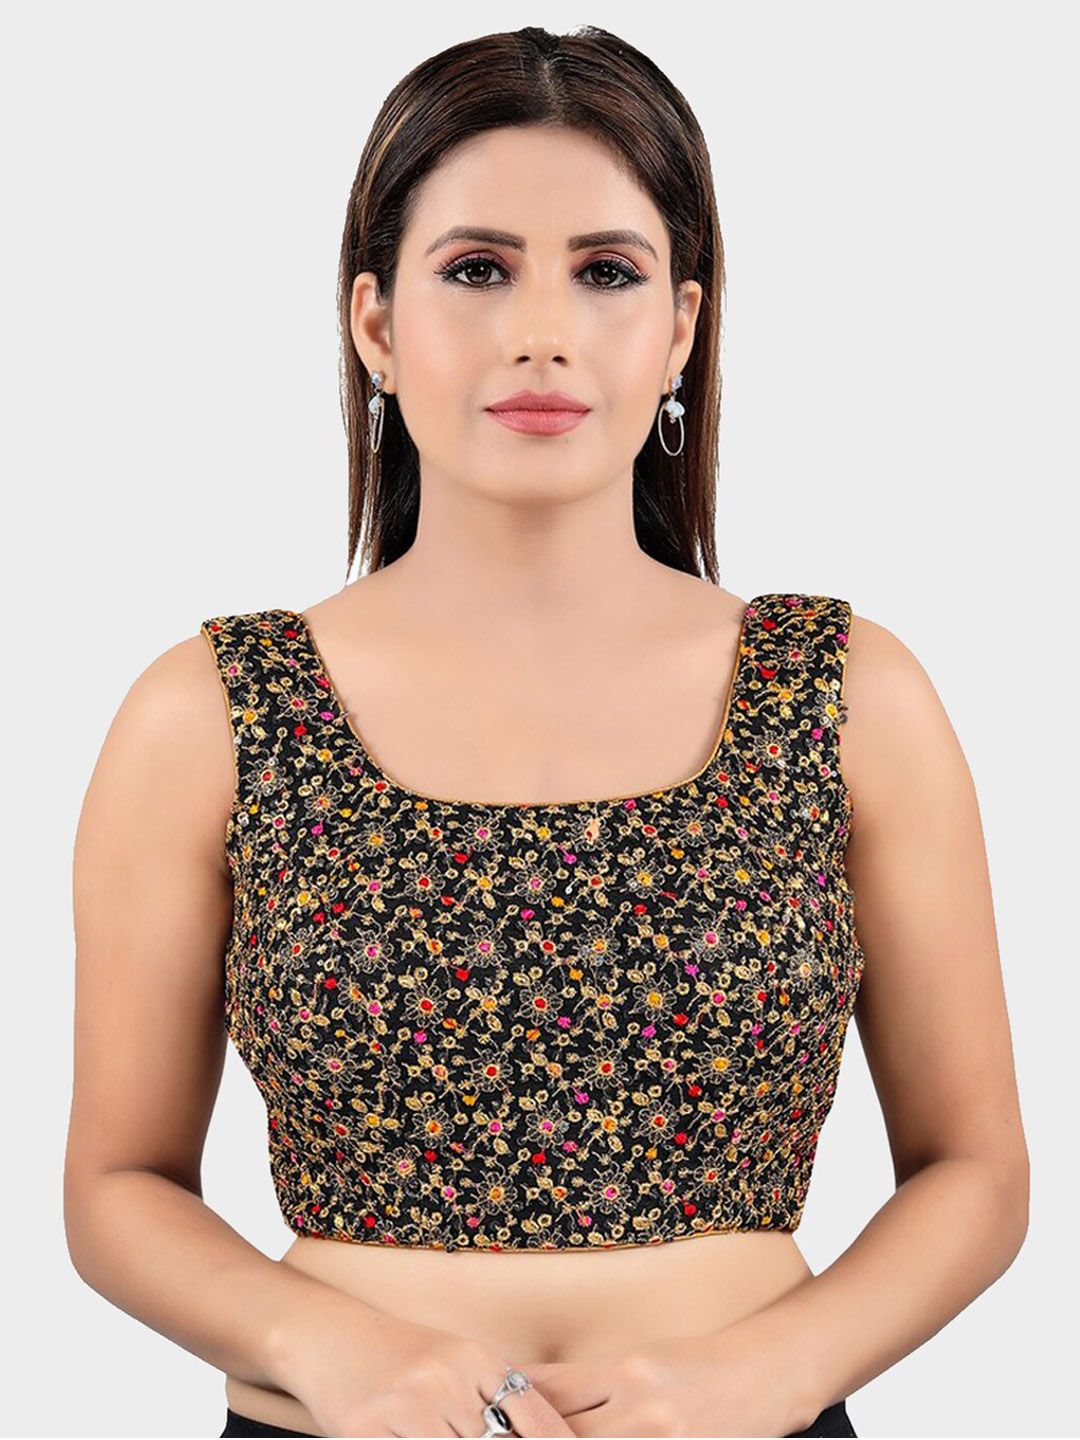 SALWAR STUDIO Black & Gold-Coloured Embroidered Readymade Saree Blouse Price in India